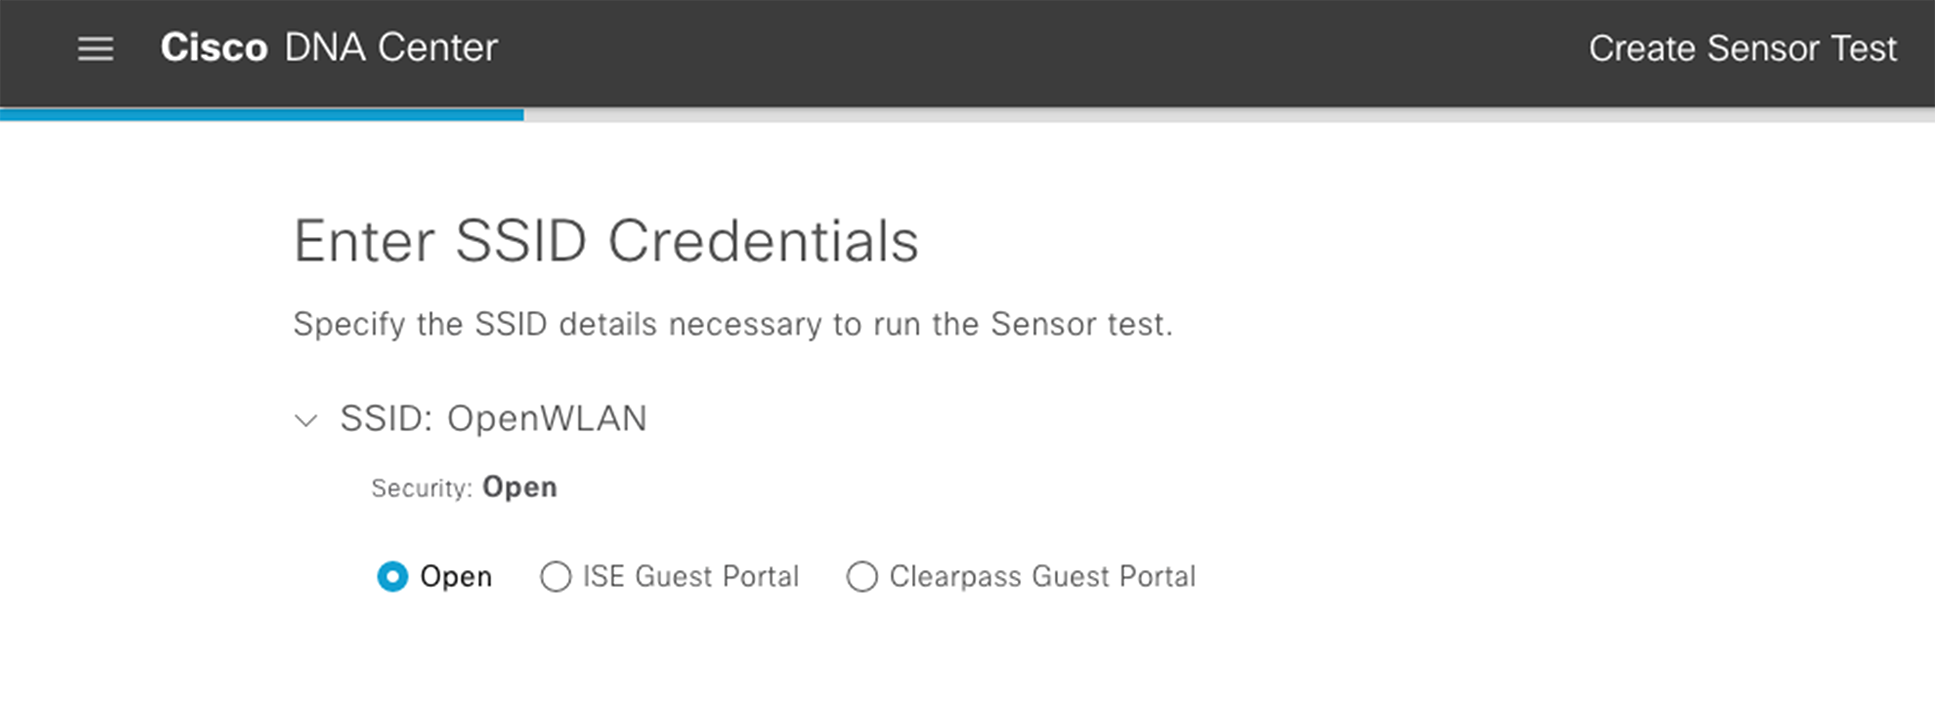 Options provided when creating a new SSID during sensor test creation